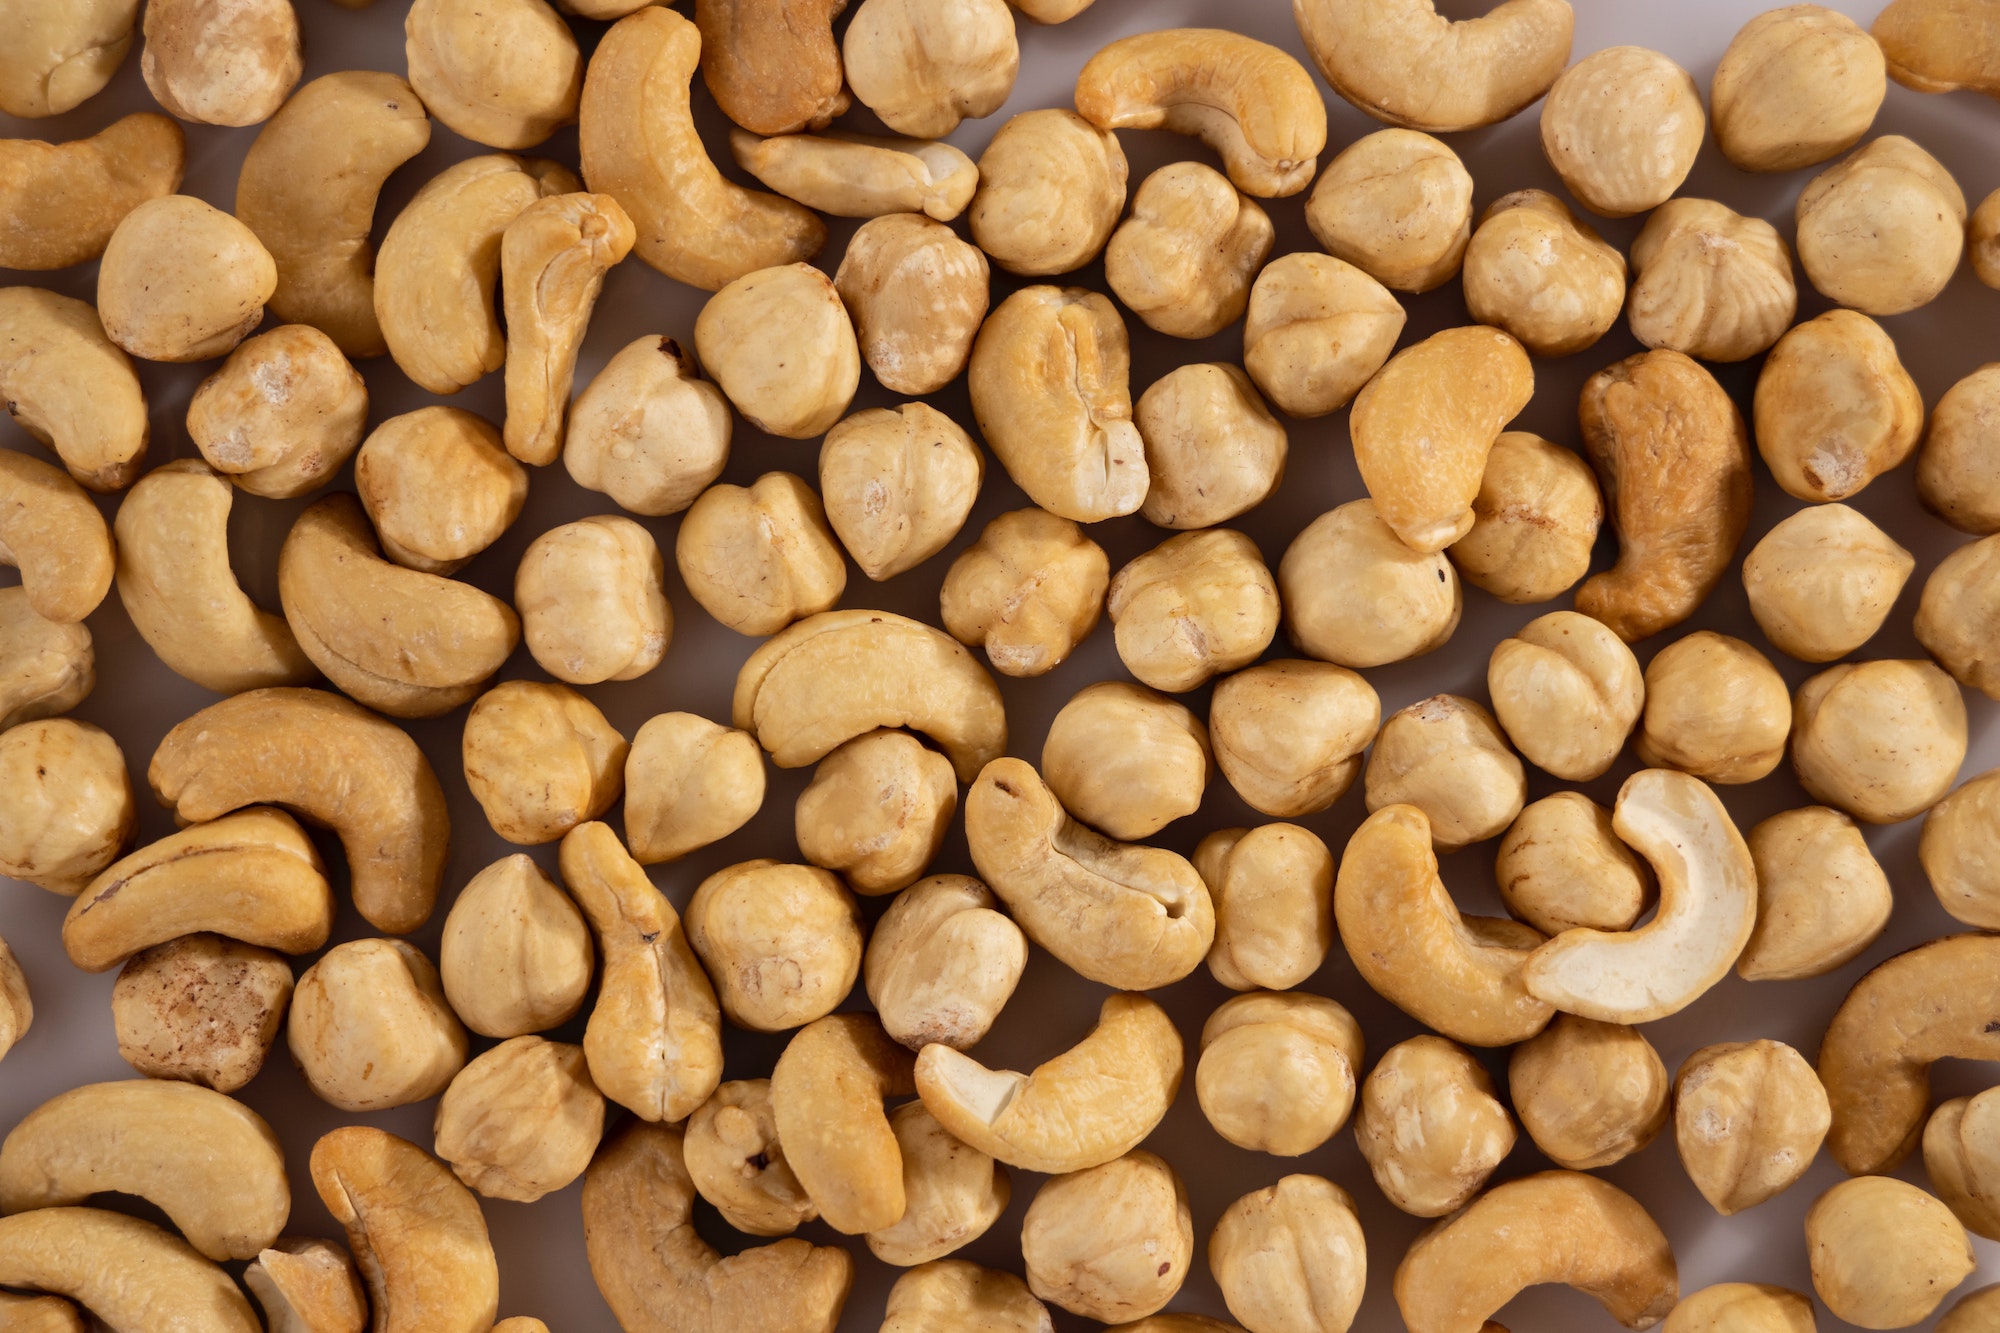 Chinese state-owned company to build cashew processing units in Guinea-Bissau